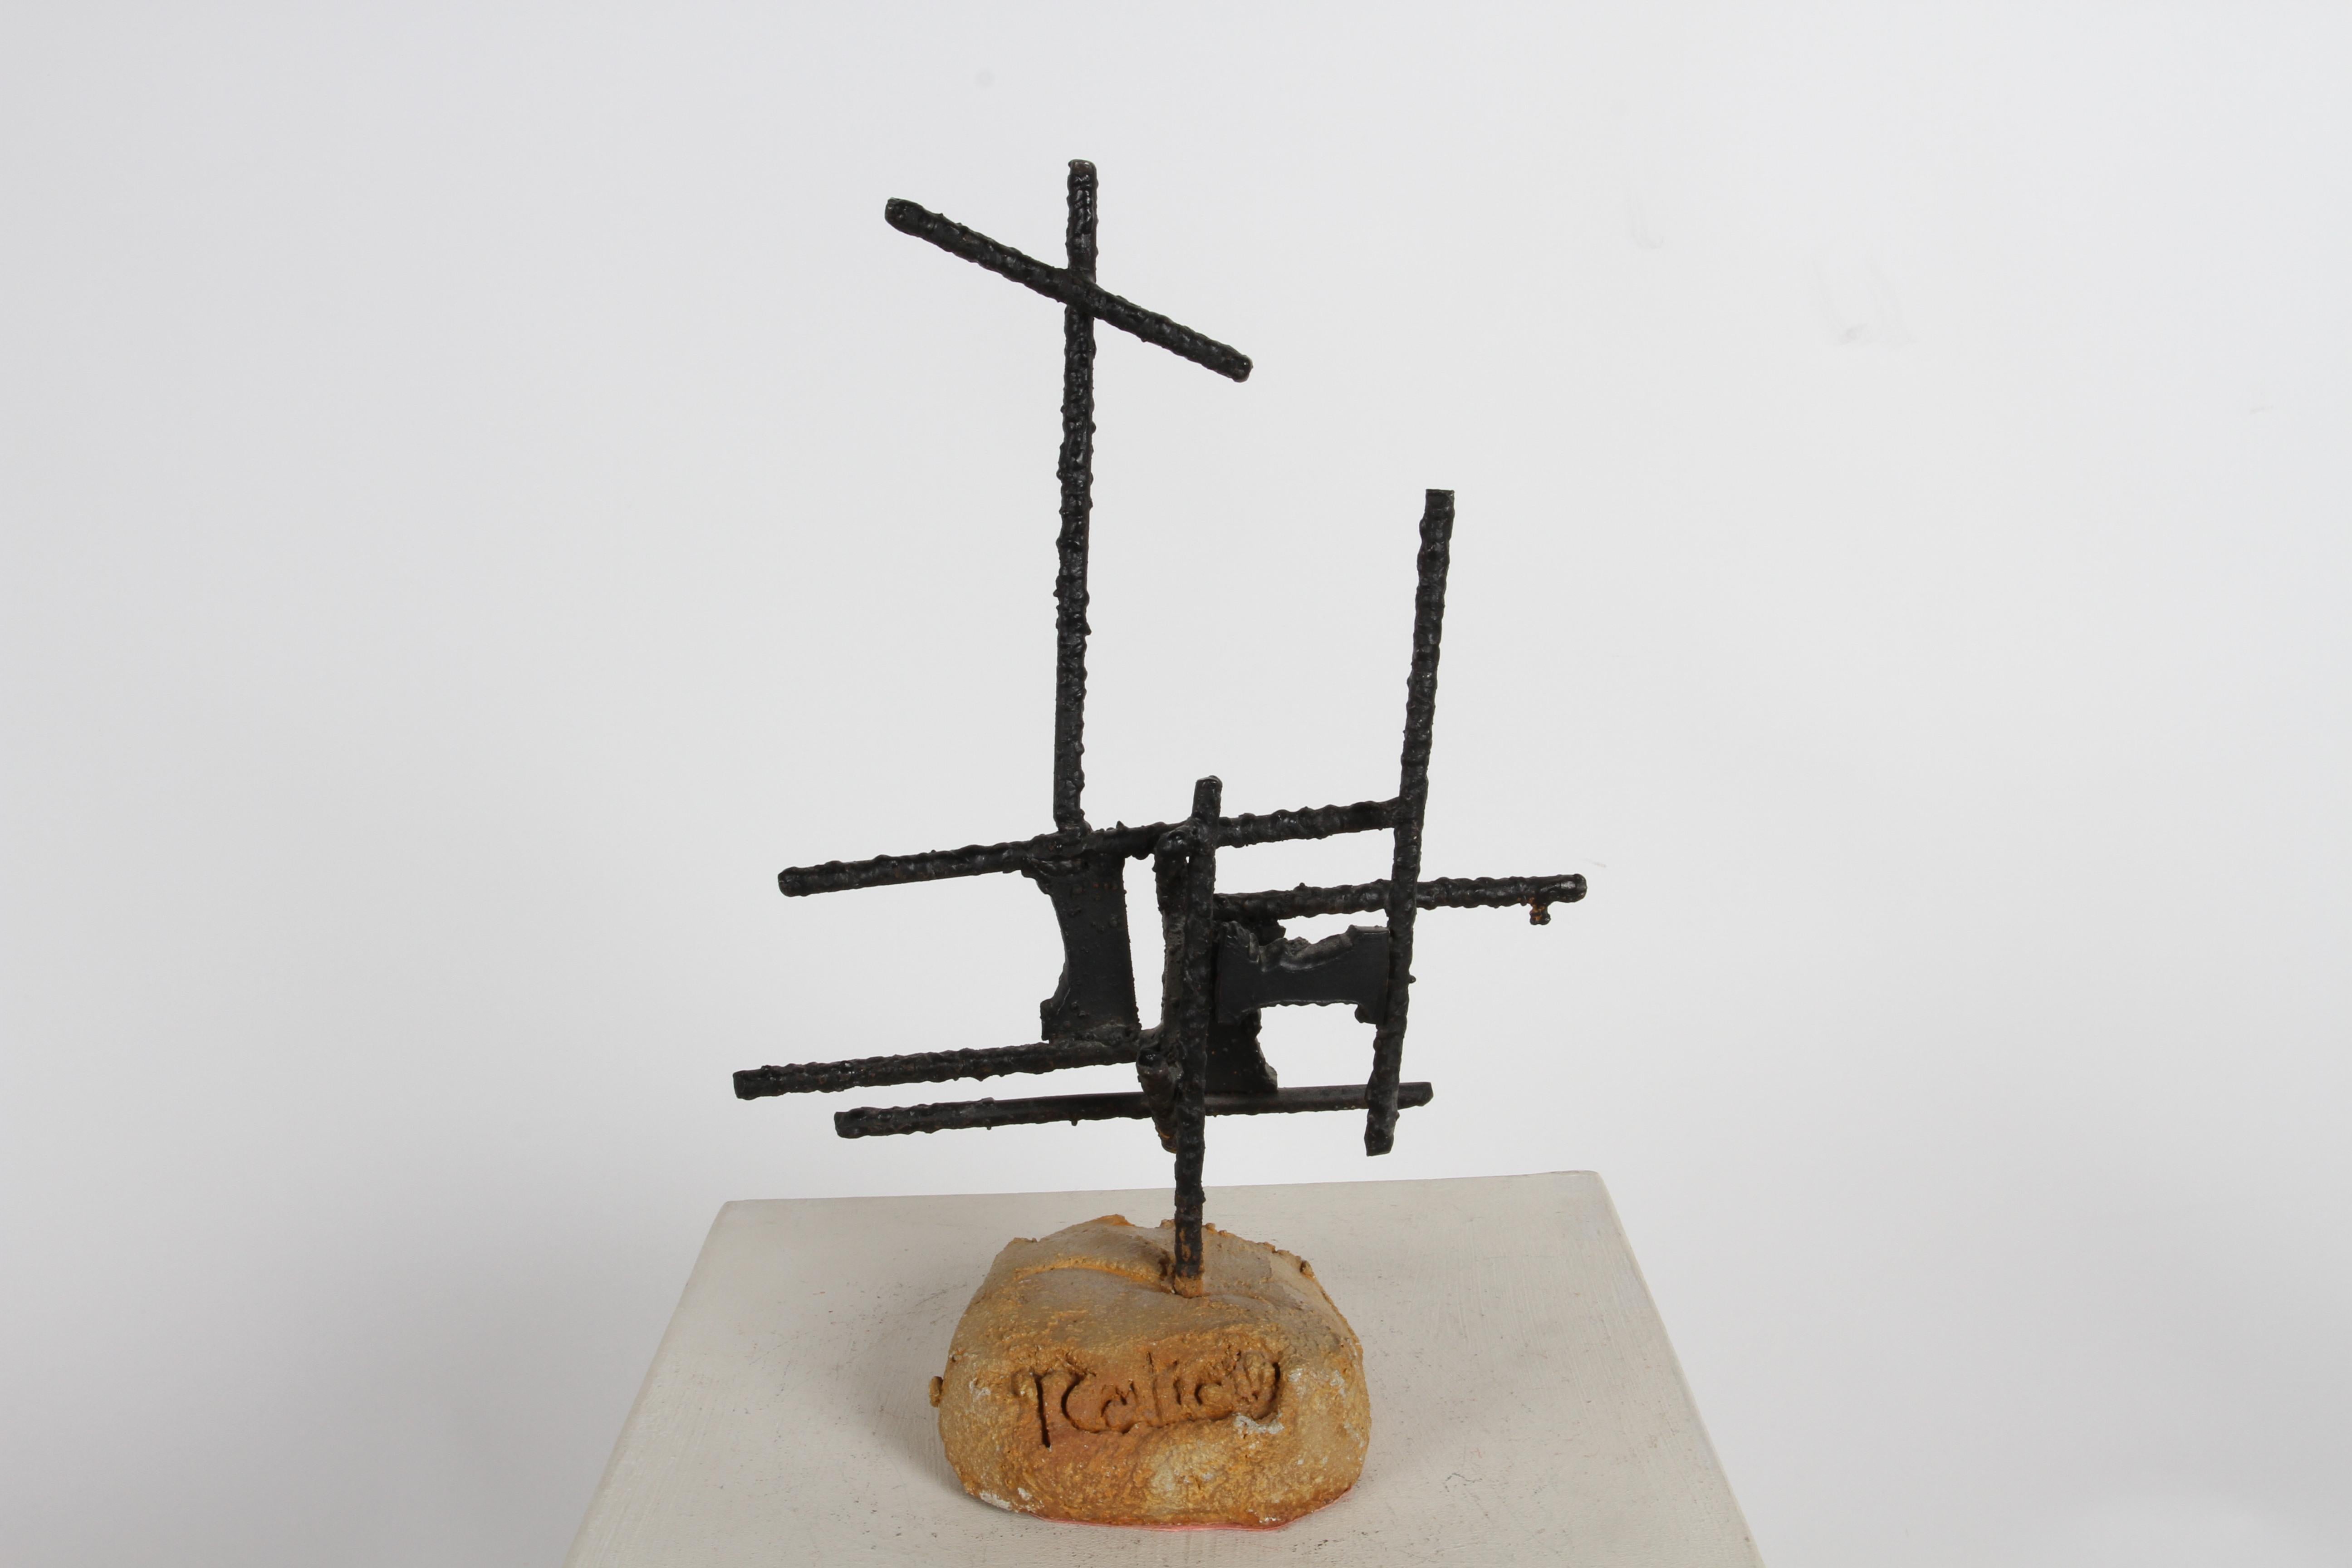 Signed Mid-Century modern Brutalist / abstract sculpture made of welded iron rebar and steel, painted black on colored concrete based. Indiscriminately signed to base. Great coffee table or book shelf sculpture. In the style of Marc Weinstein of